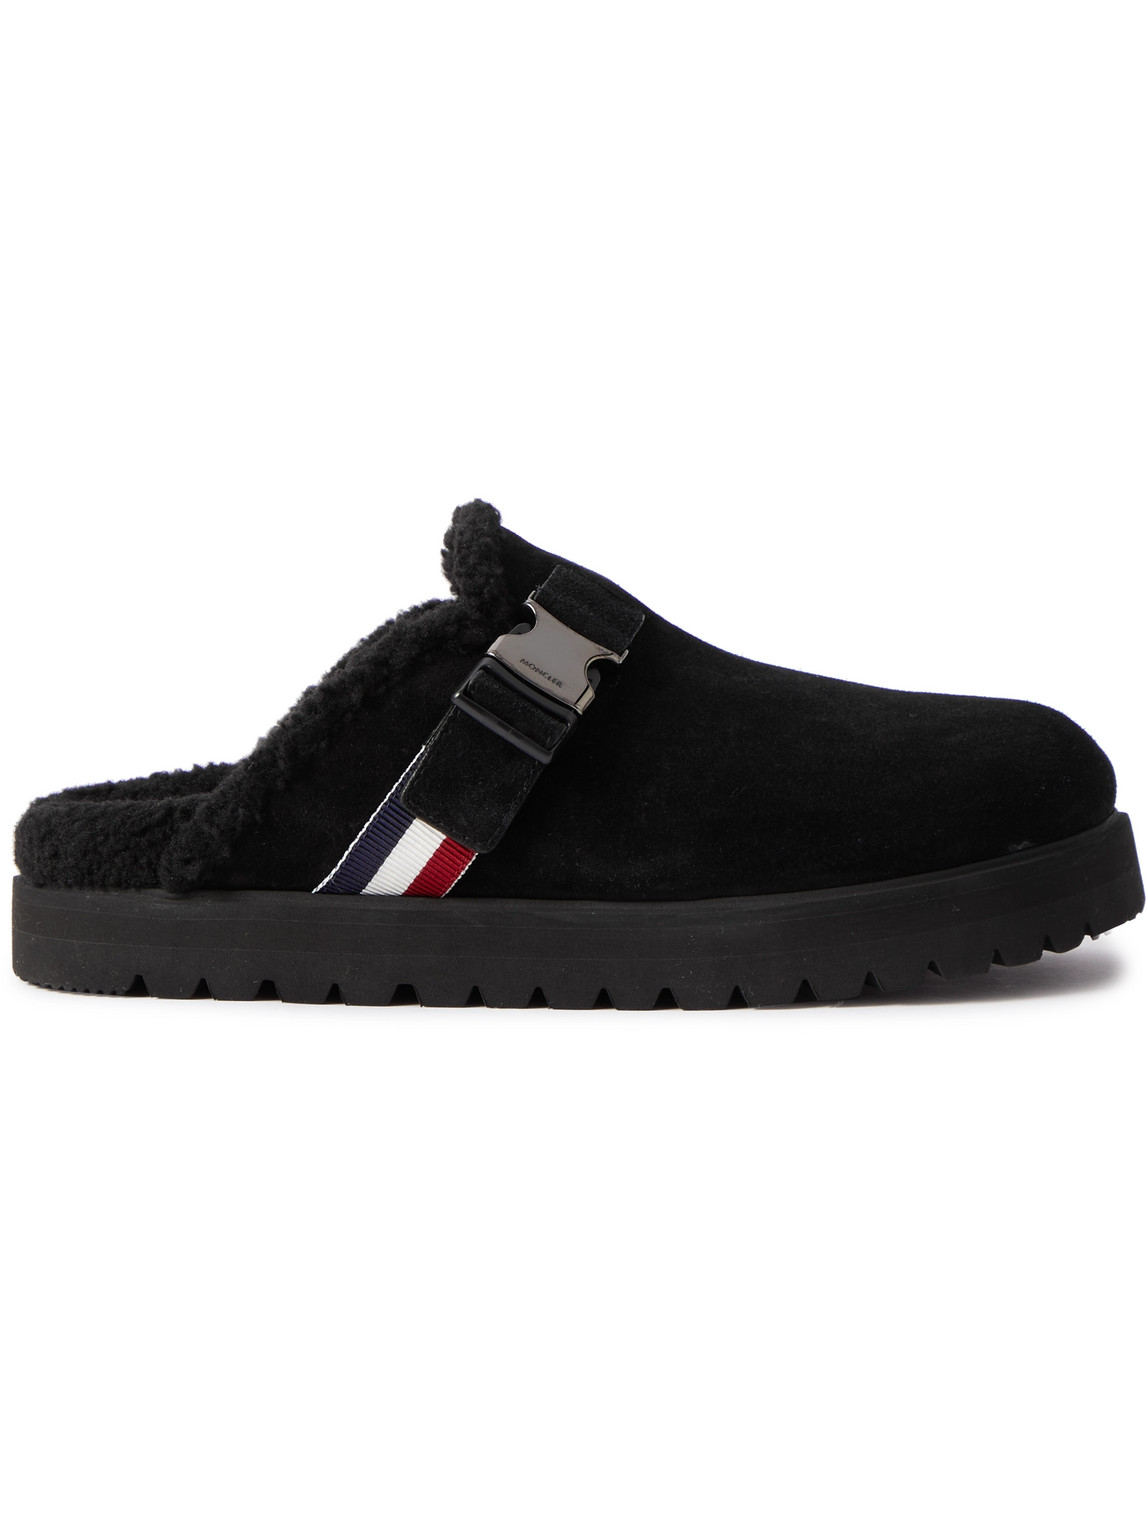 MONCLER FAUX SHEARLING-LINED SUEDE CLOGS